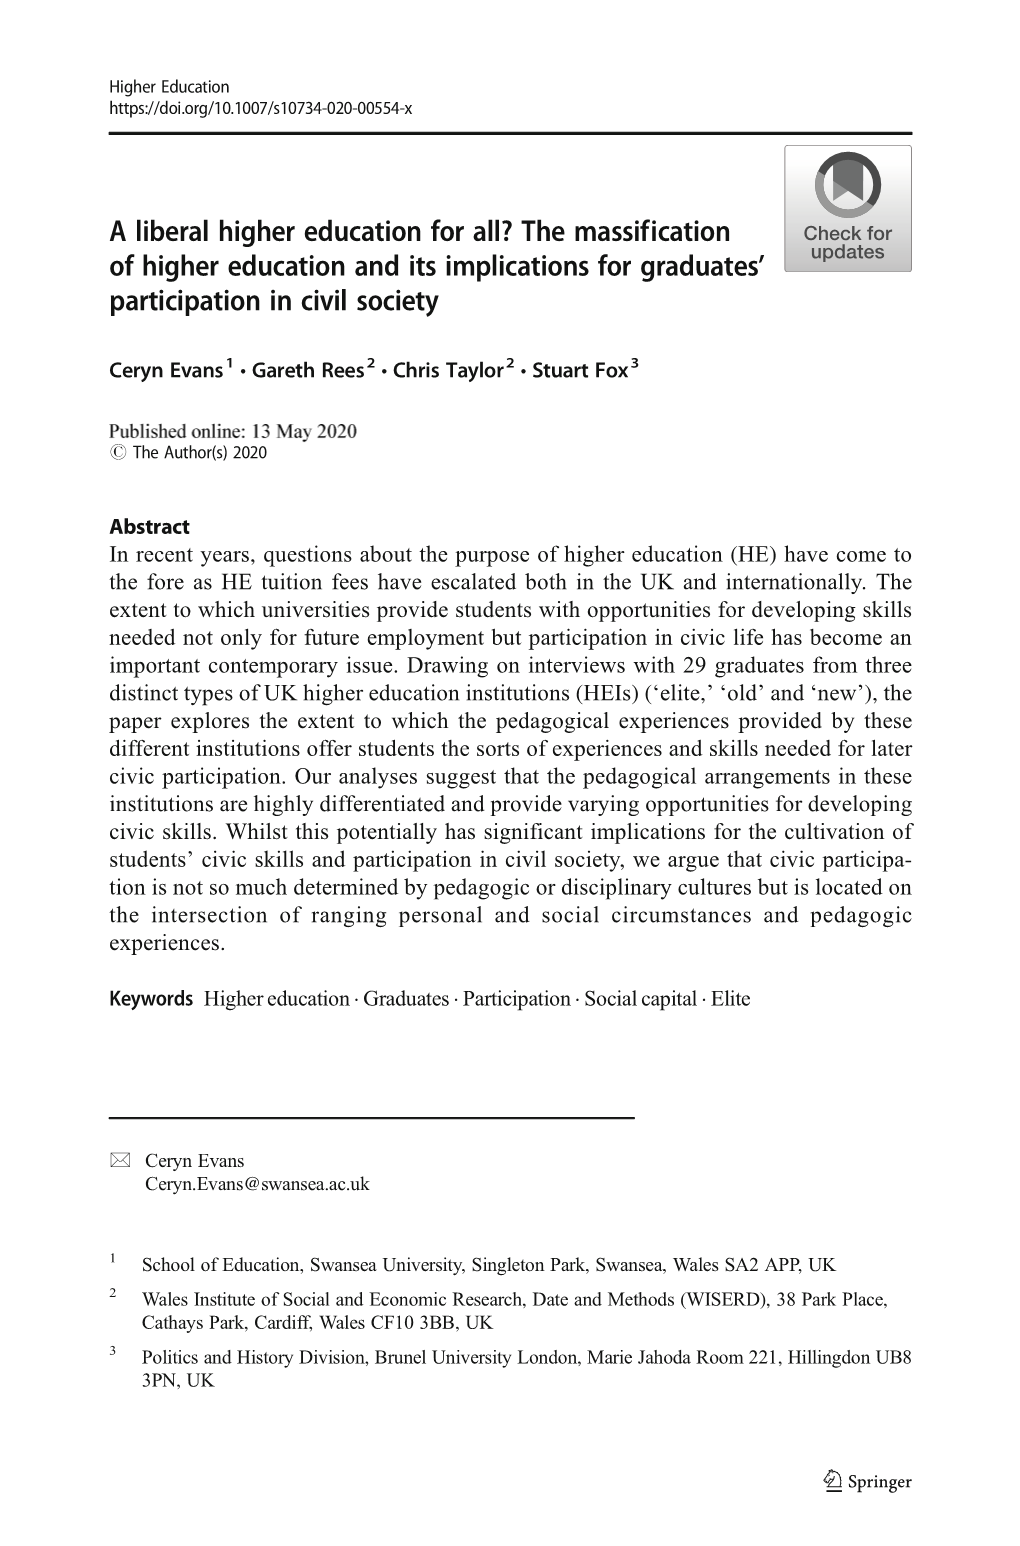 The Massification of Higher Education and Its Implications for Graduates’ Participation in Civil Society